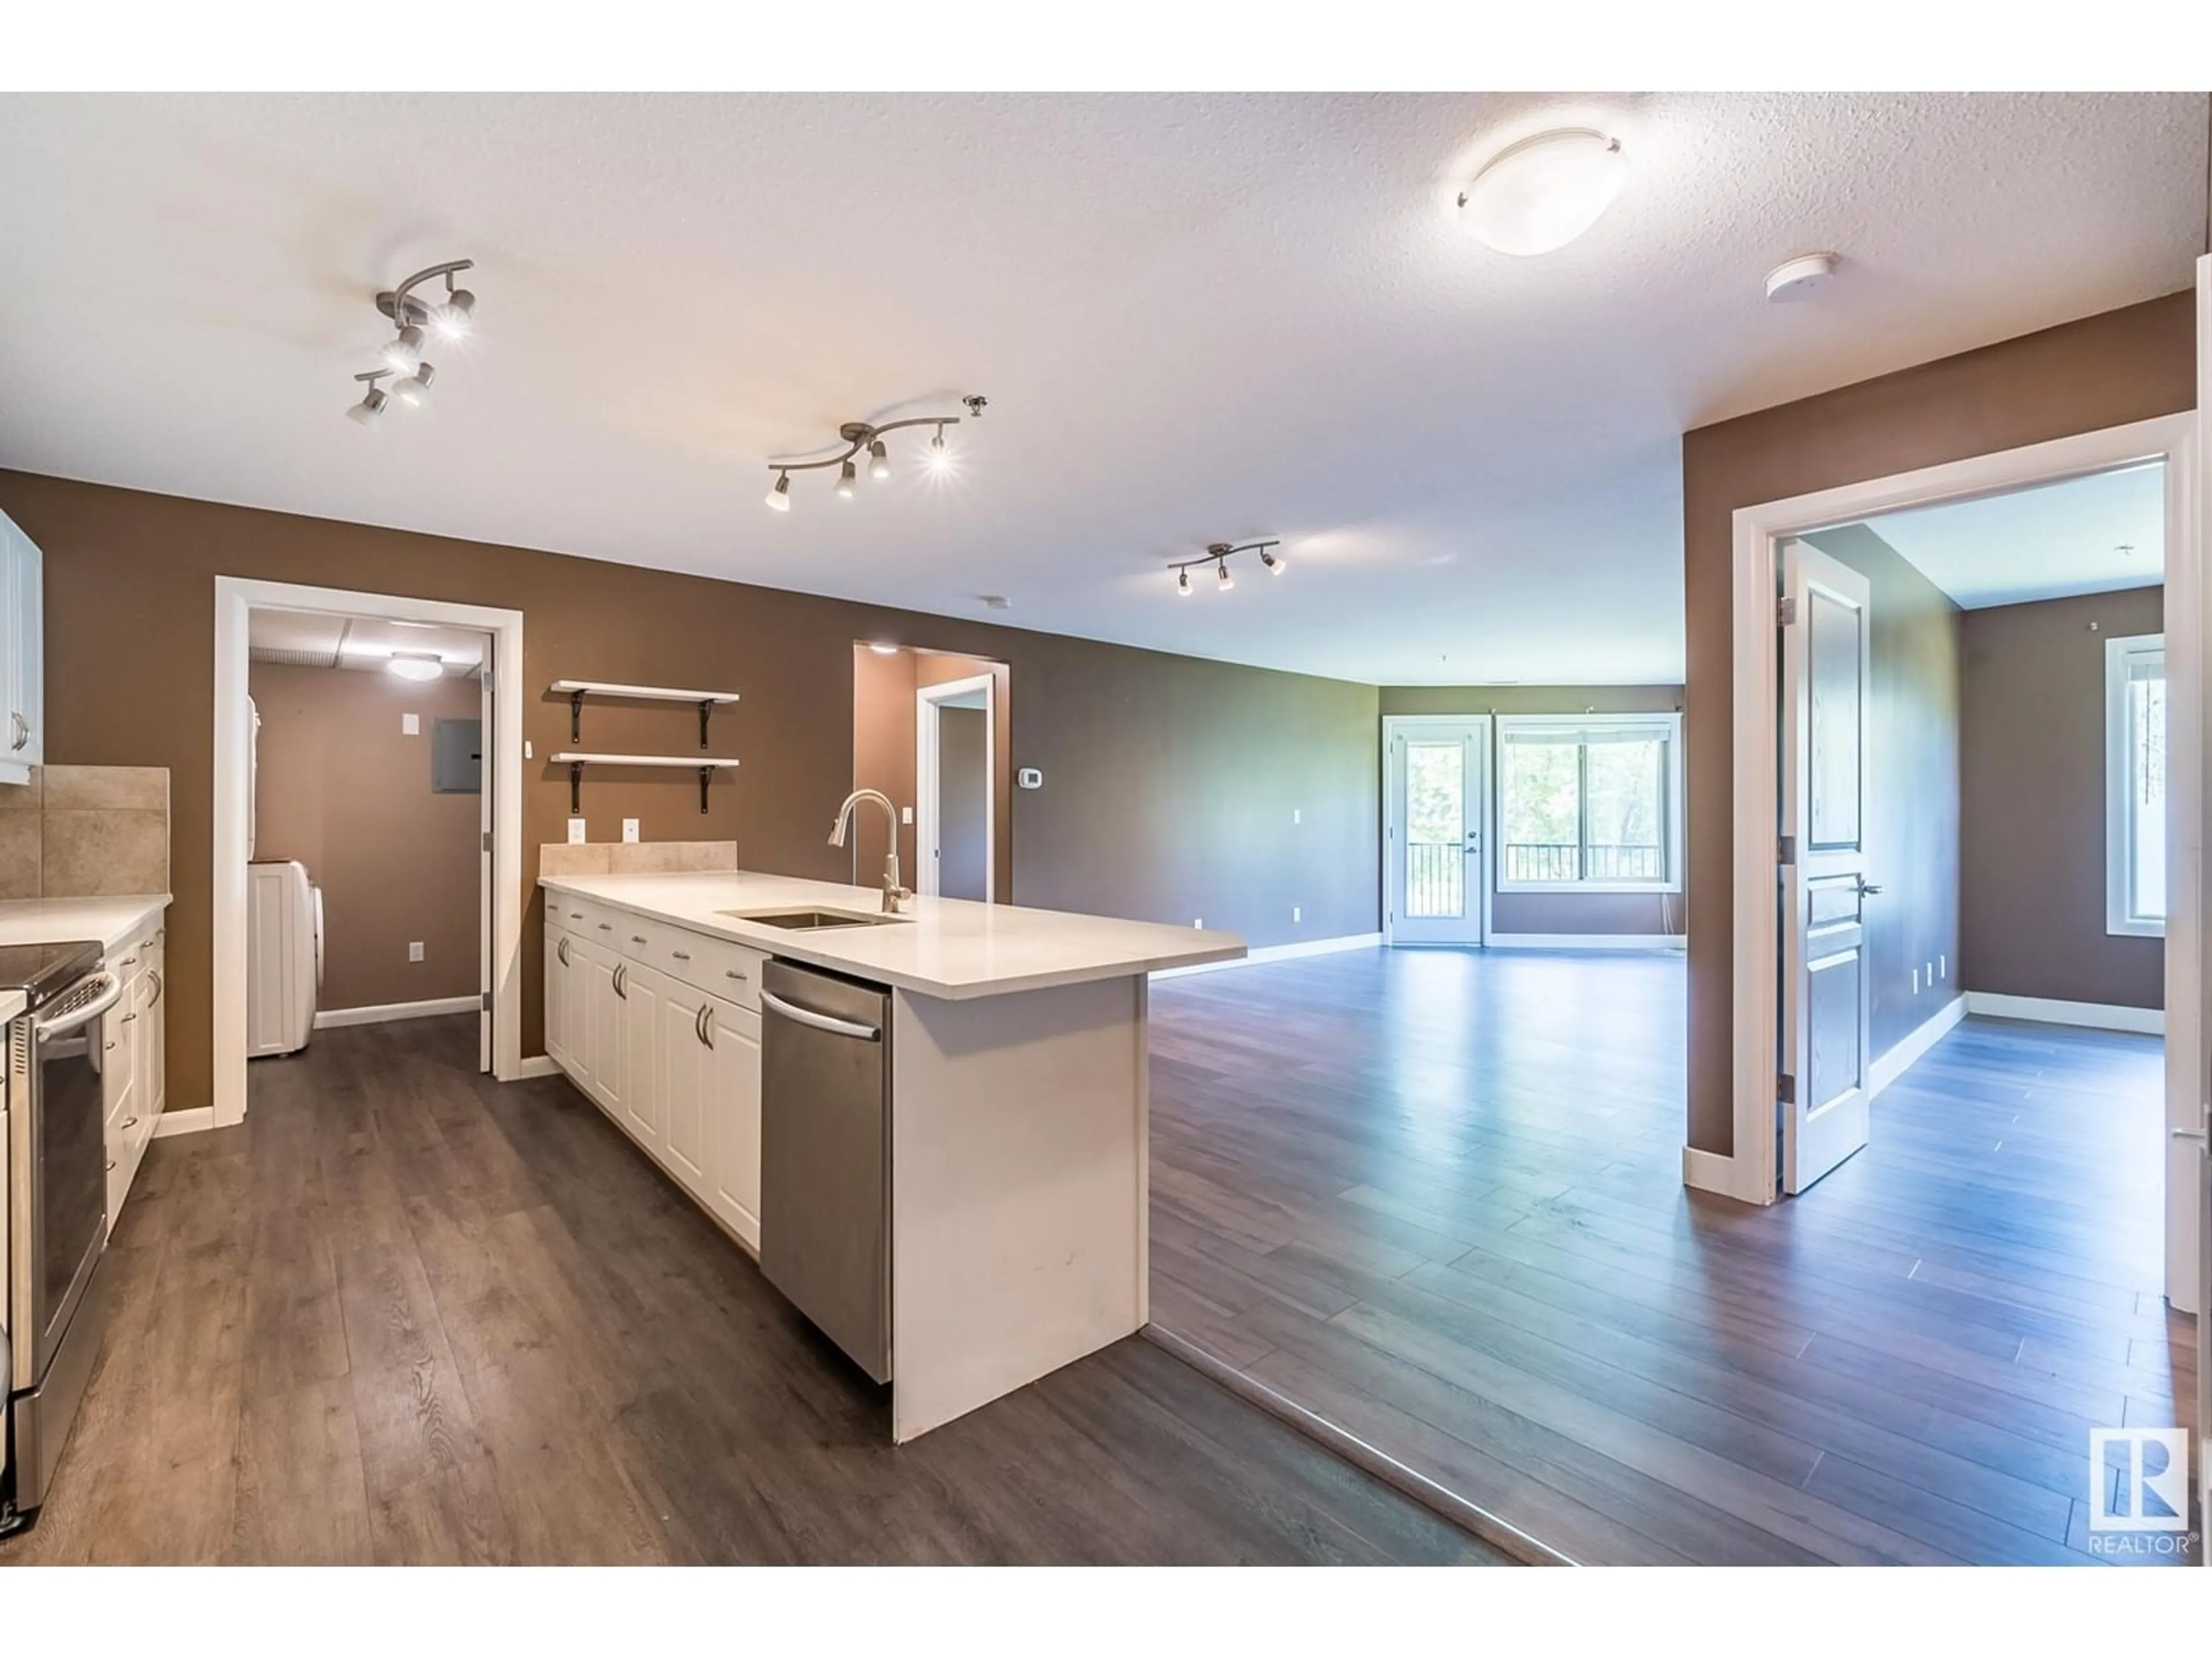 Contemporary kitchen for #224 530 HOOKE RD NW, Edmonton Alberta T5A5J5